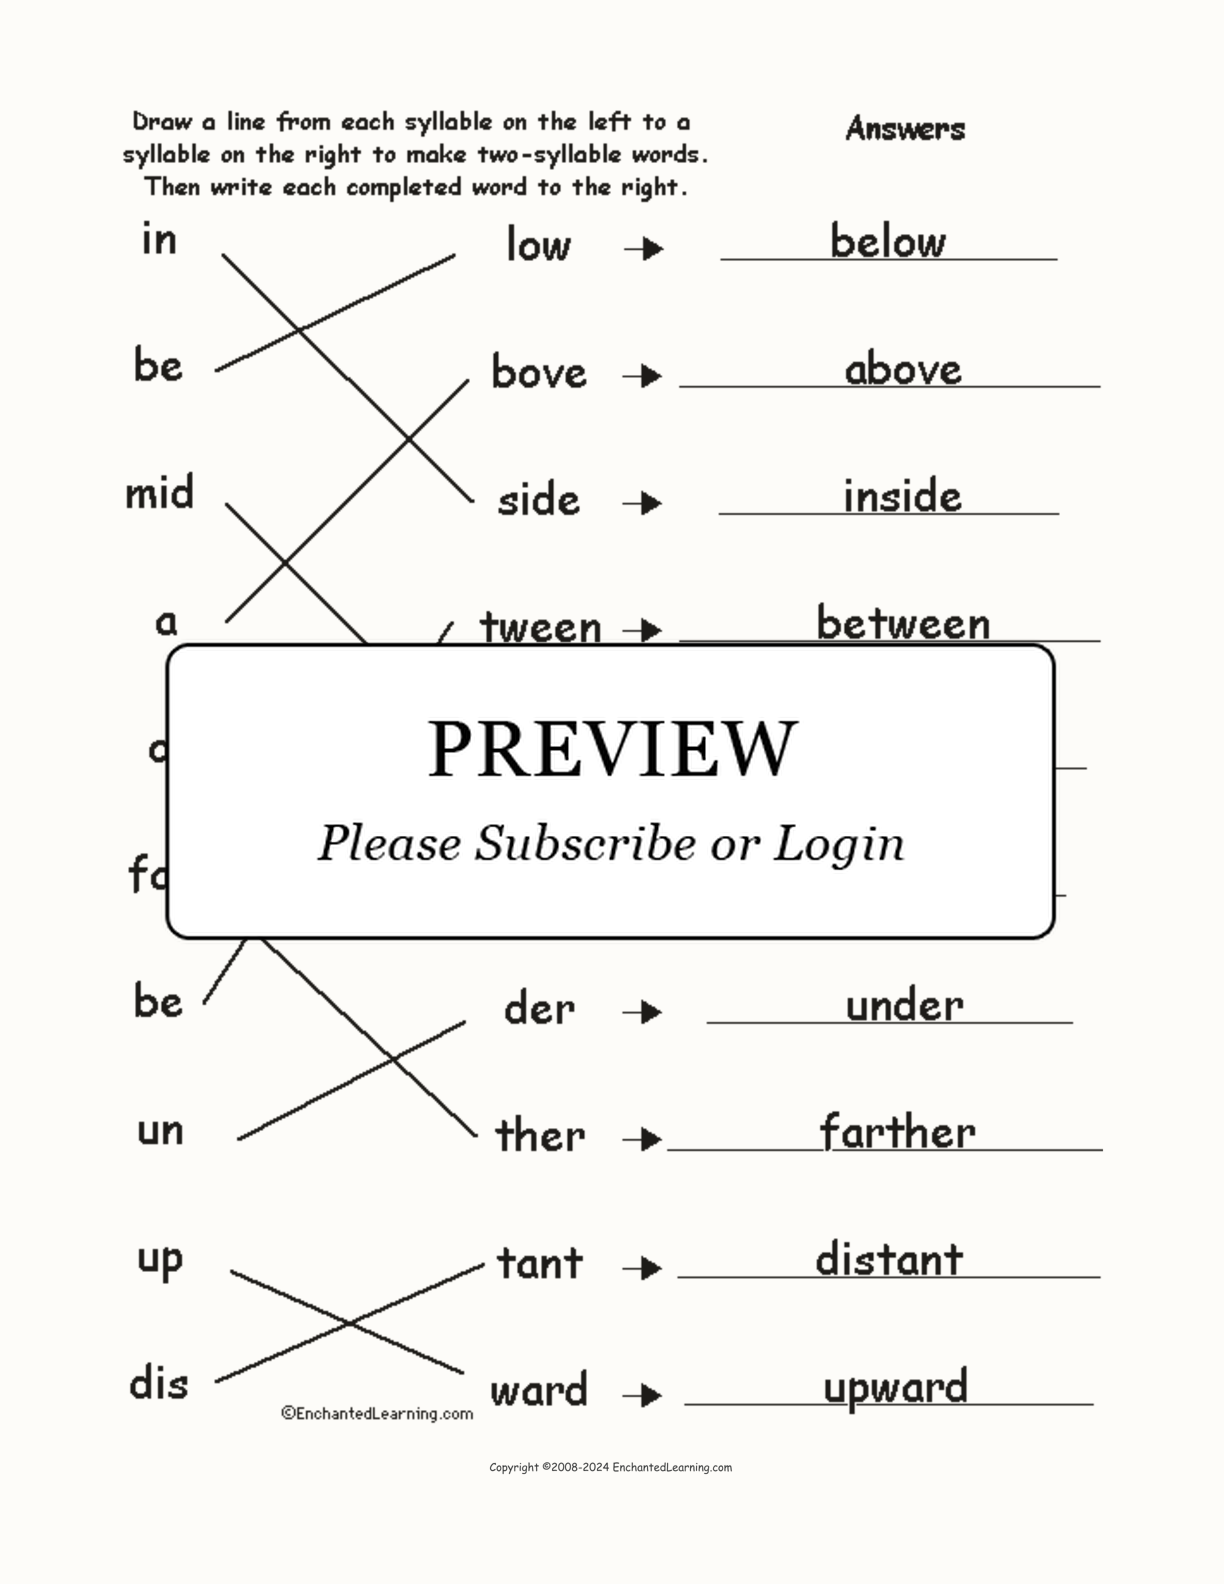 Match the Syllables: Location Words interactive worksheet page 2